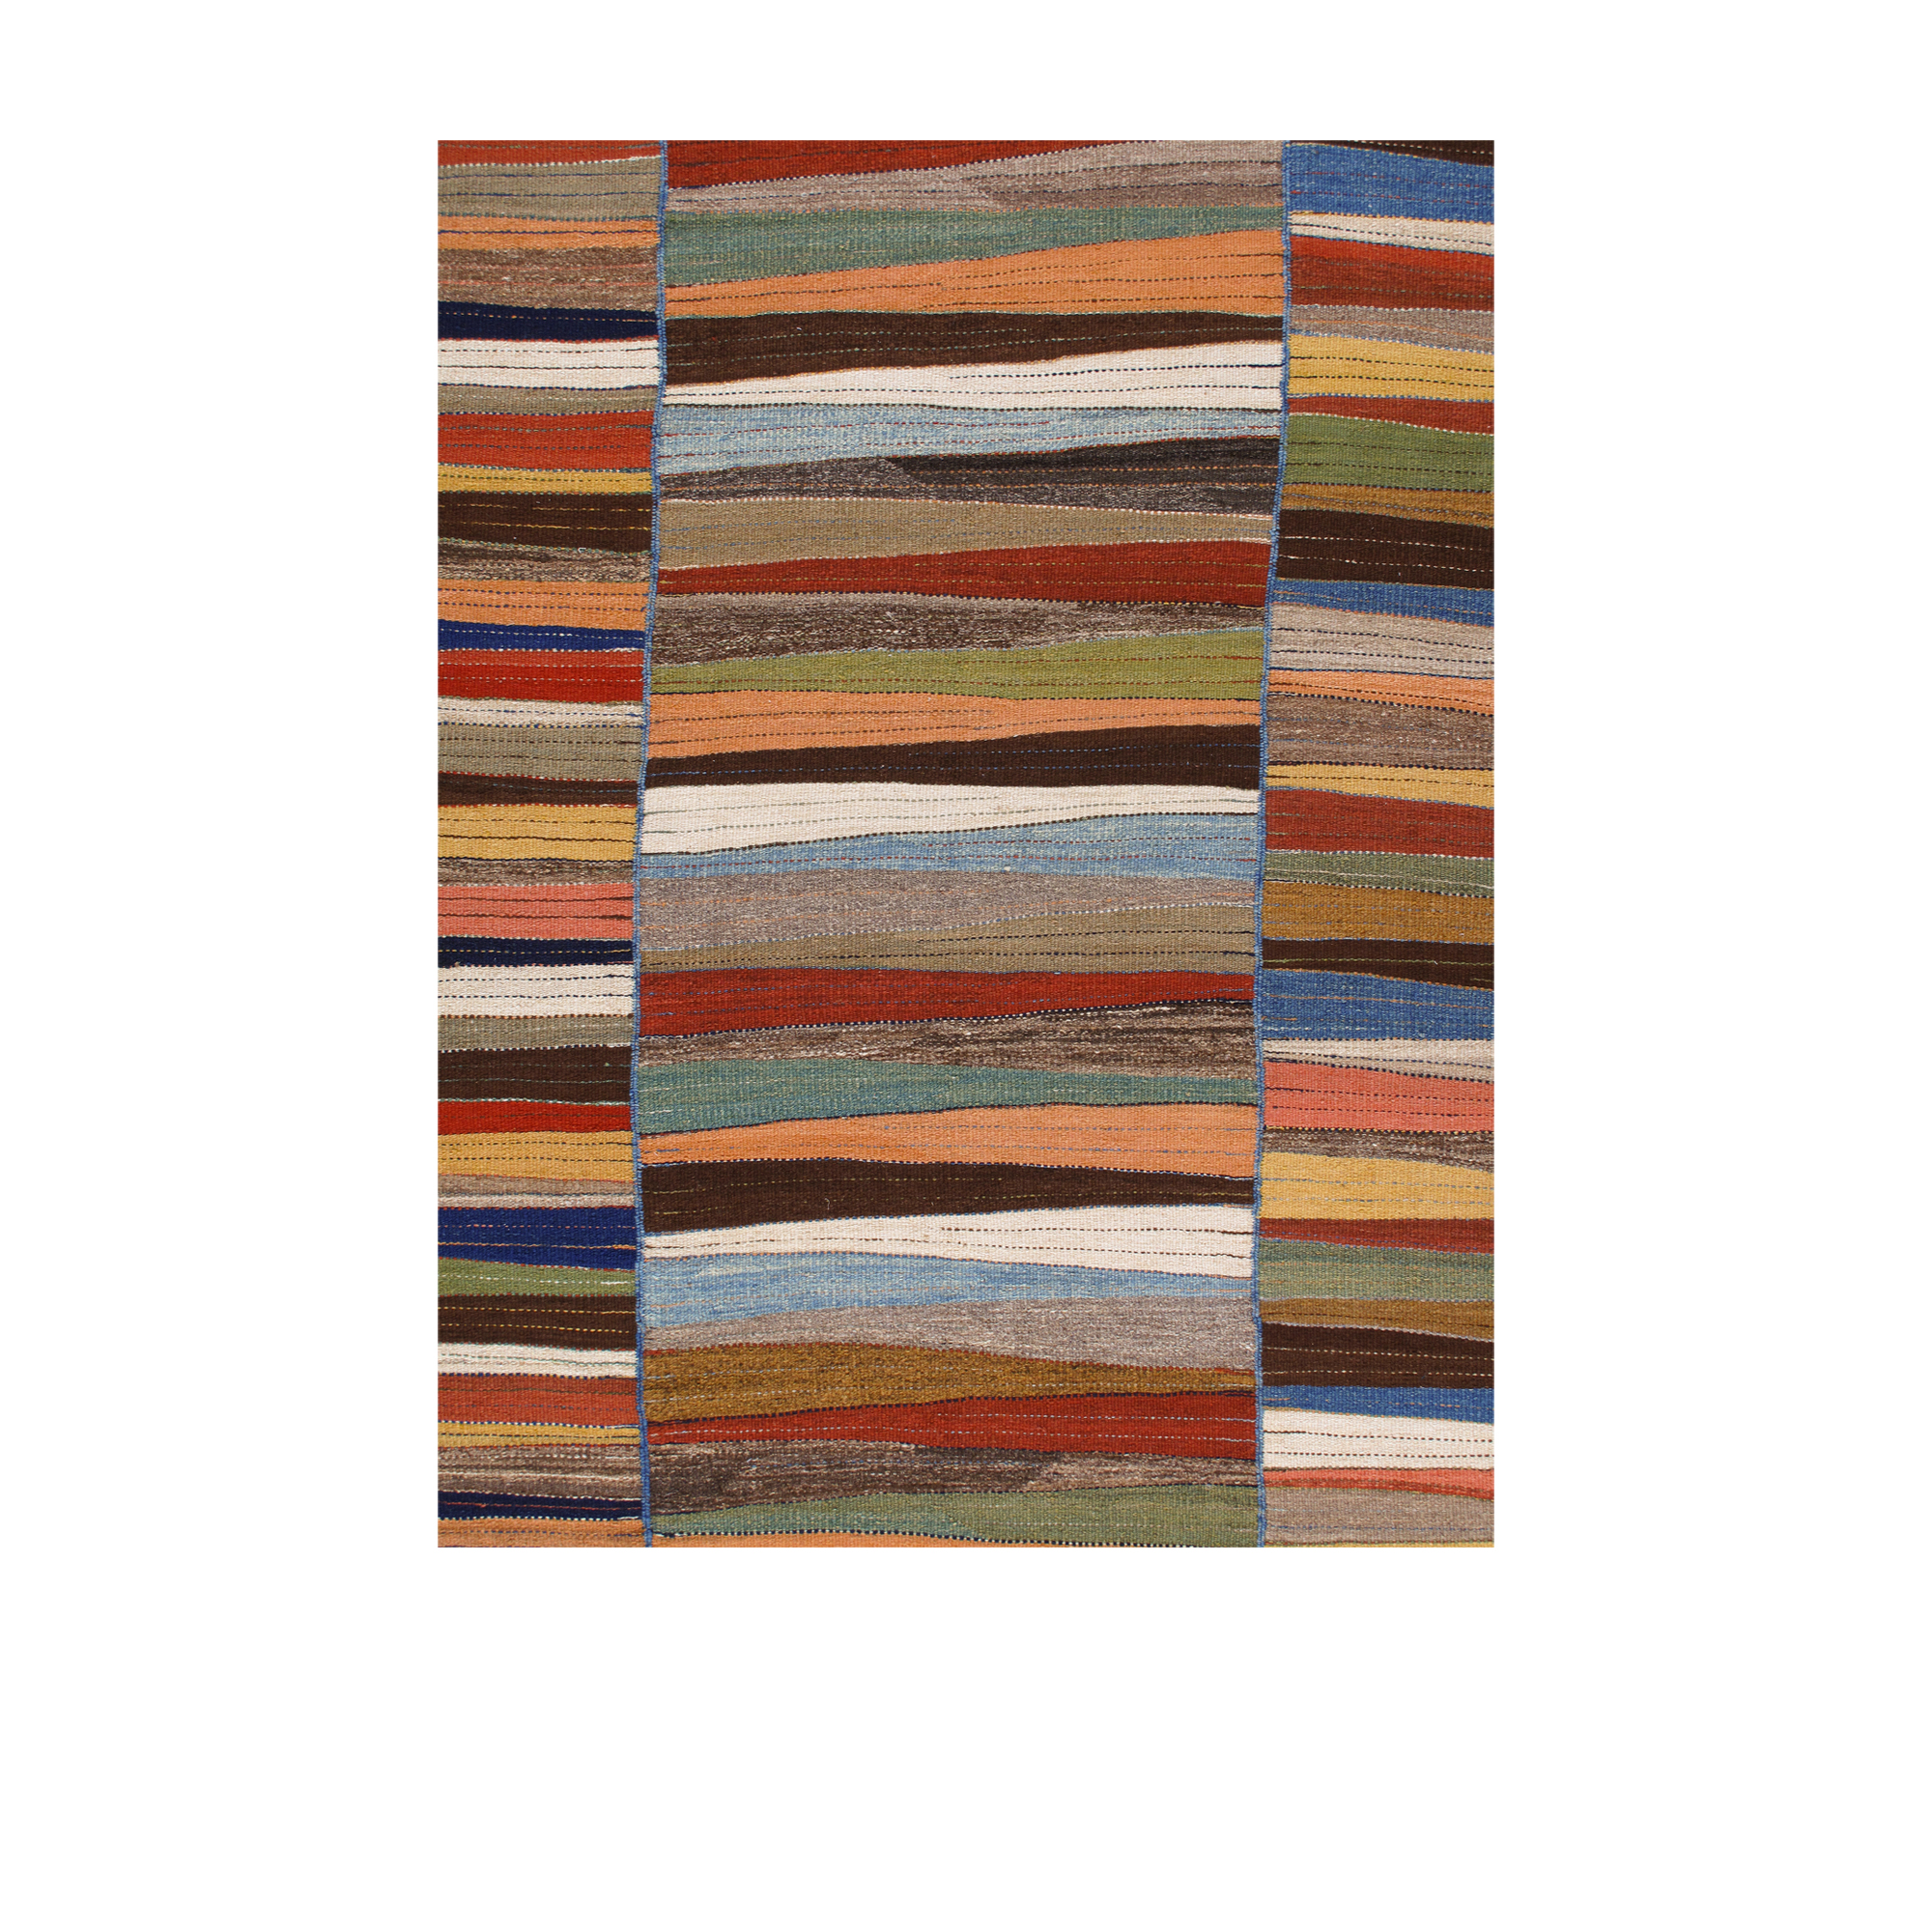 This Mazandaran rug is hand-woven and crafted with 100% wool.